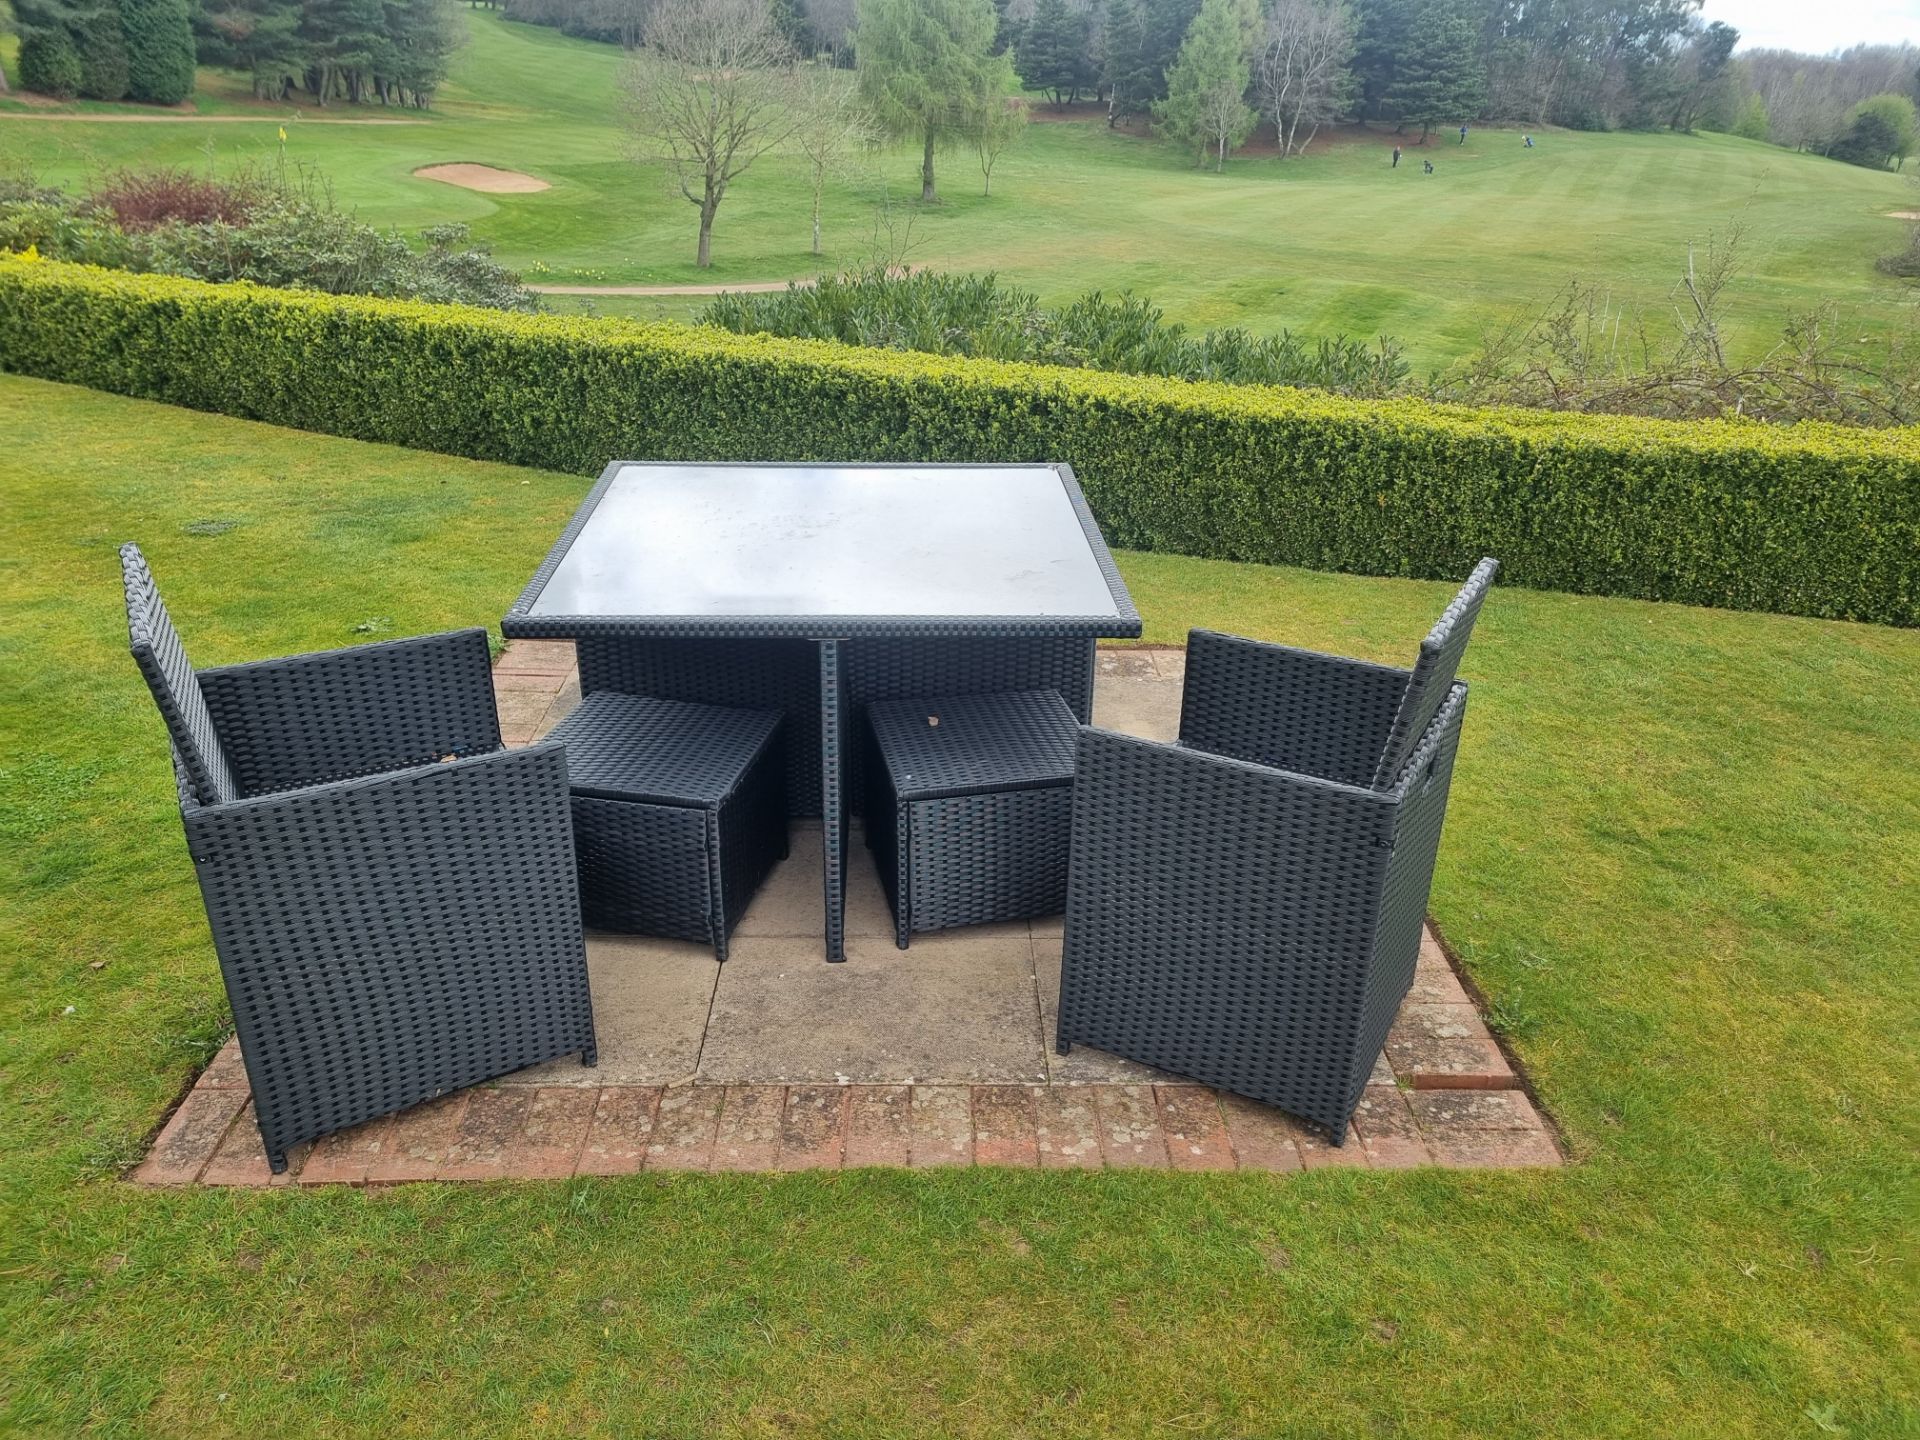 Cube Rattan Garden Furniture Piece Set table with glass top 4 chairs and side table/stool 1100 x